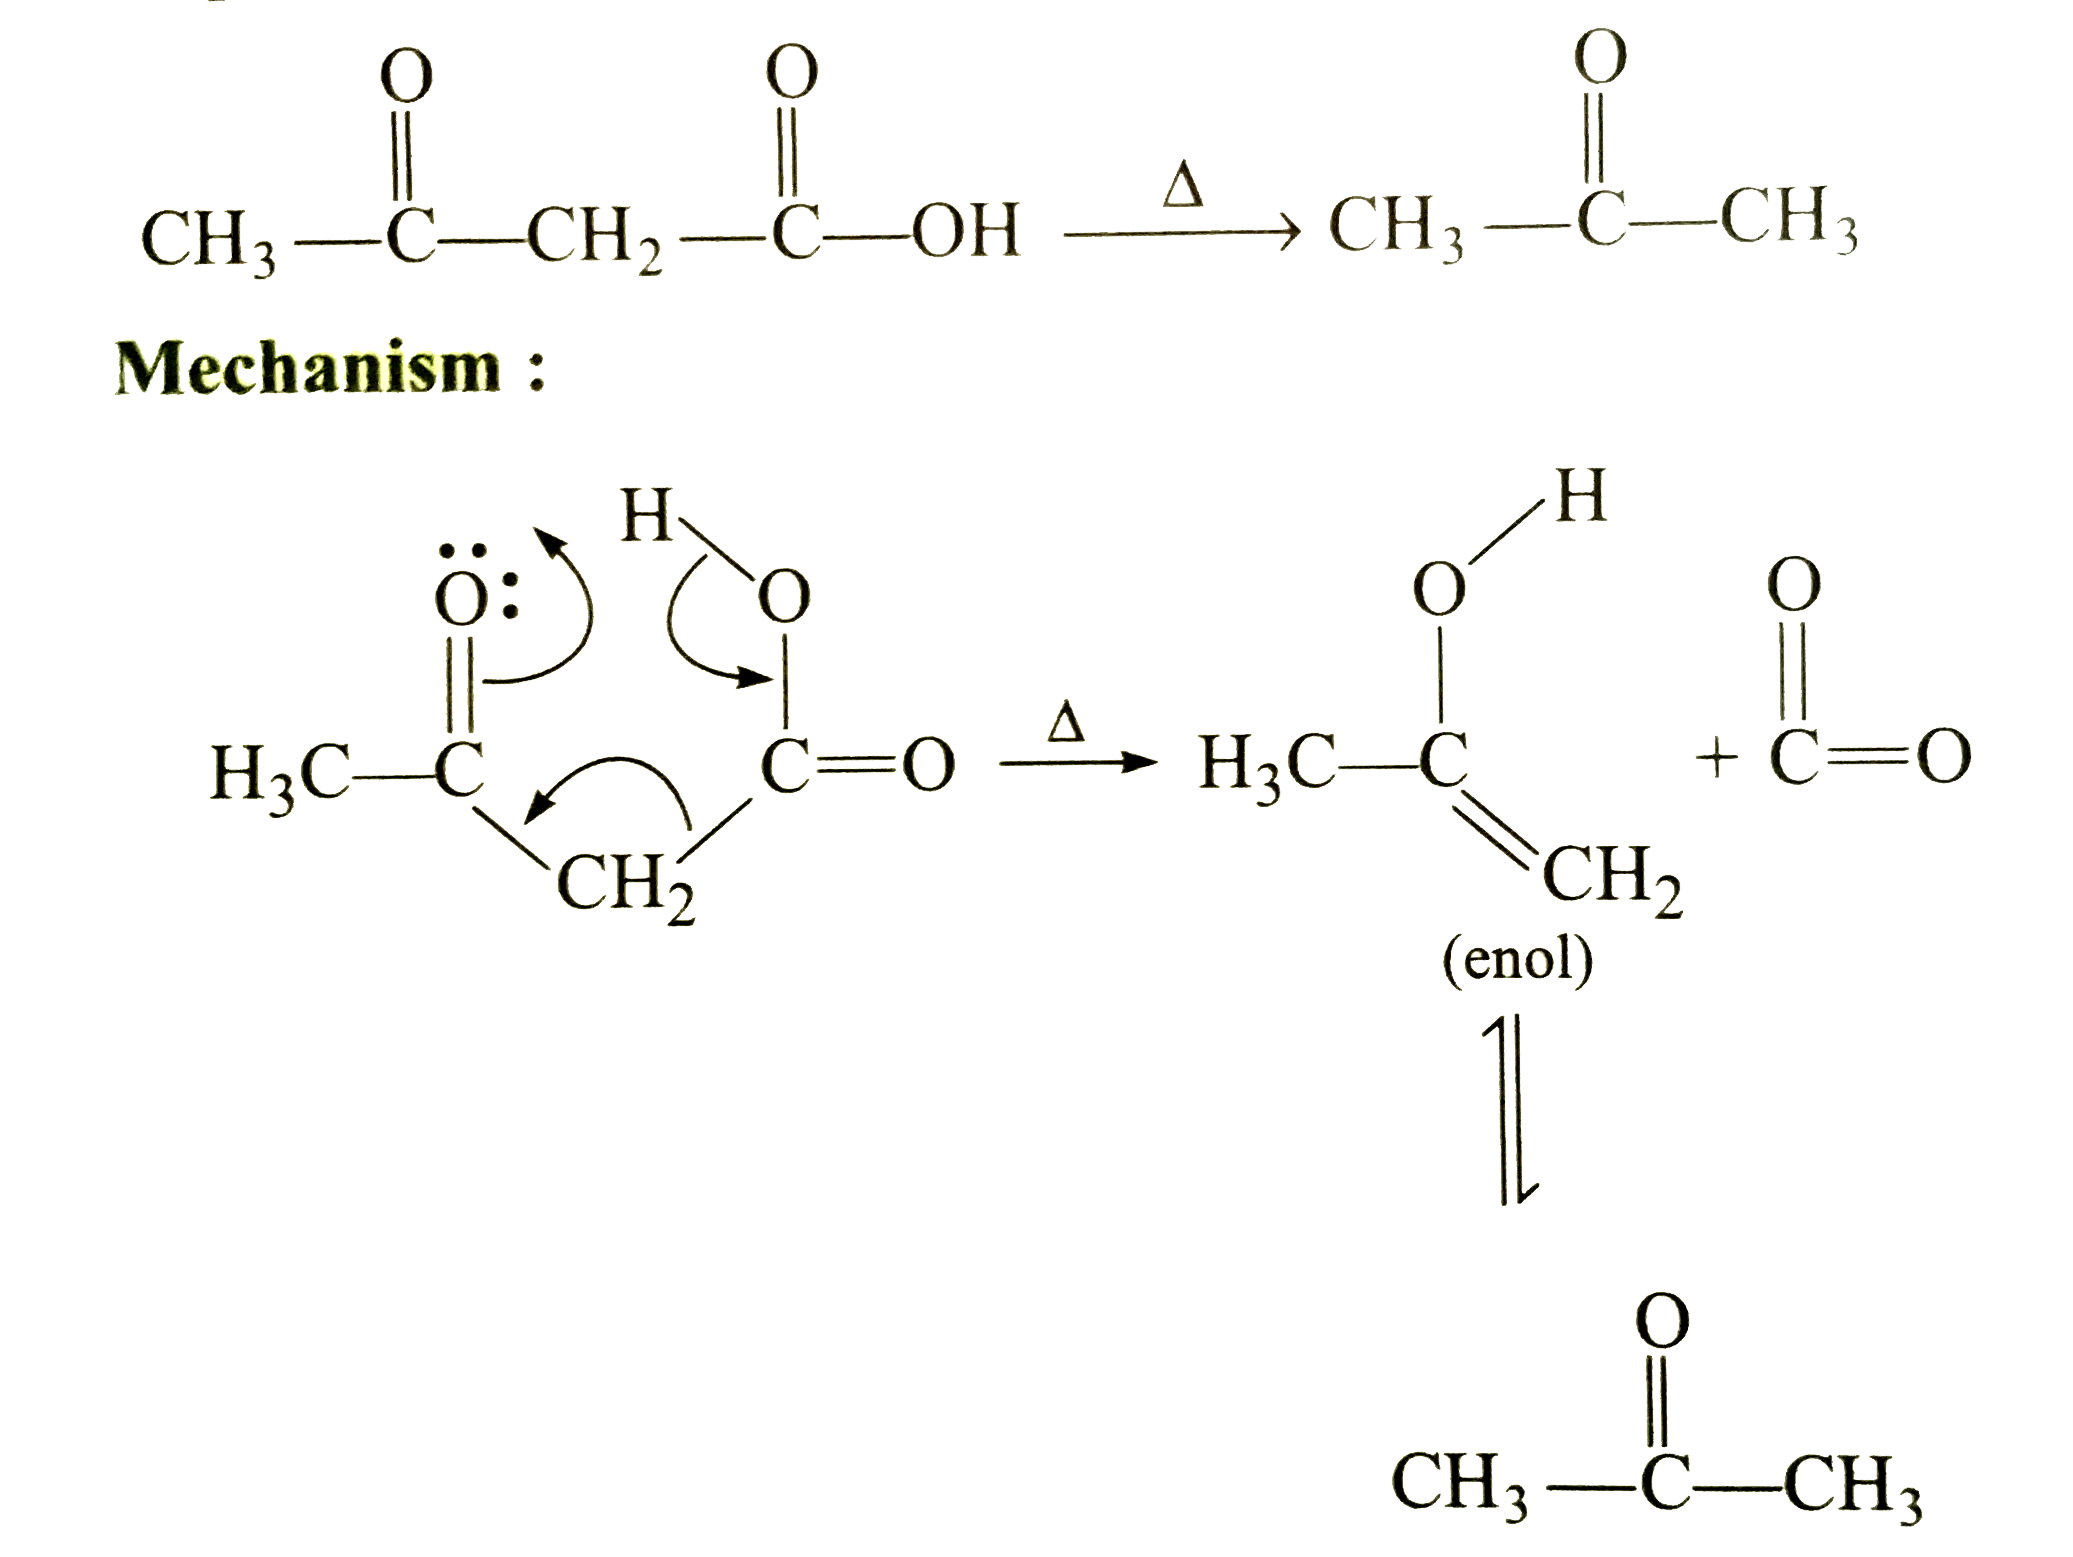 The decarboxylation of beta-ketoacids beta,gamma-unsaturated acid an germinal diacid proceed through the fomultlon of cyclic transition state in presence of heat.      Find the correct product of following reaction :   H(3)C-CH=CH-CD(2)-overset(O)overset(||)C-OHoverset(Delta)to